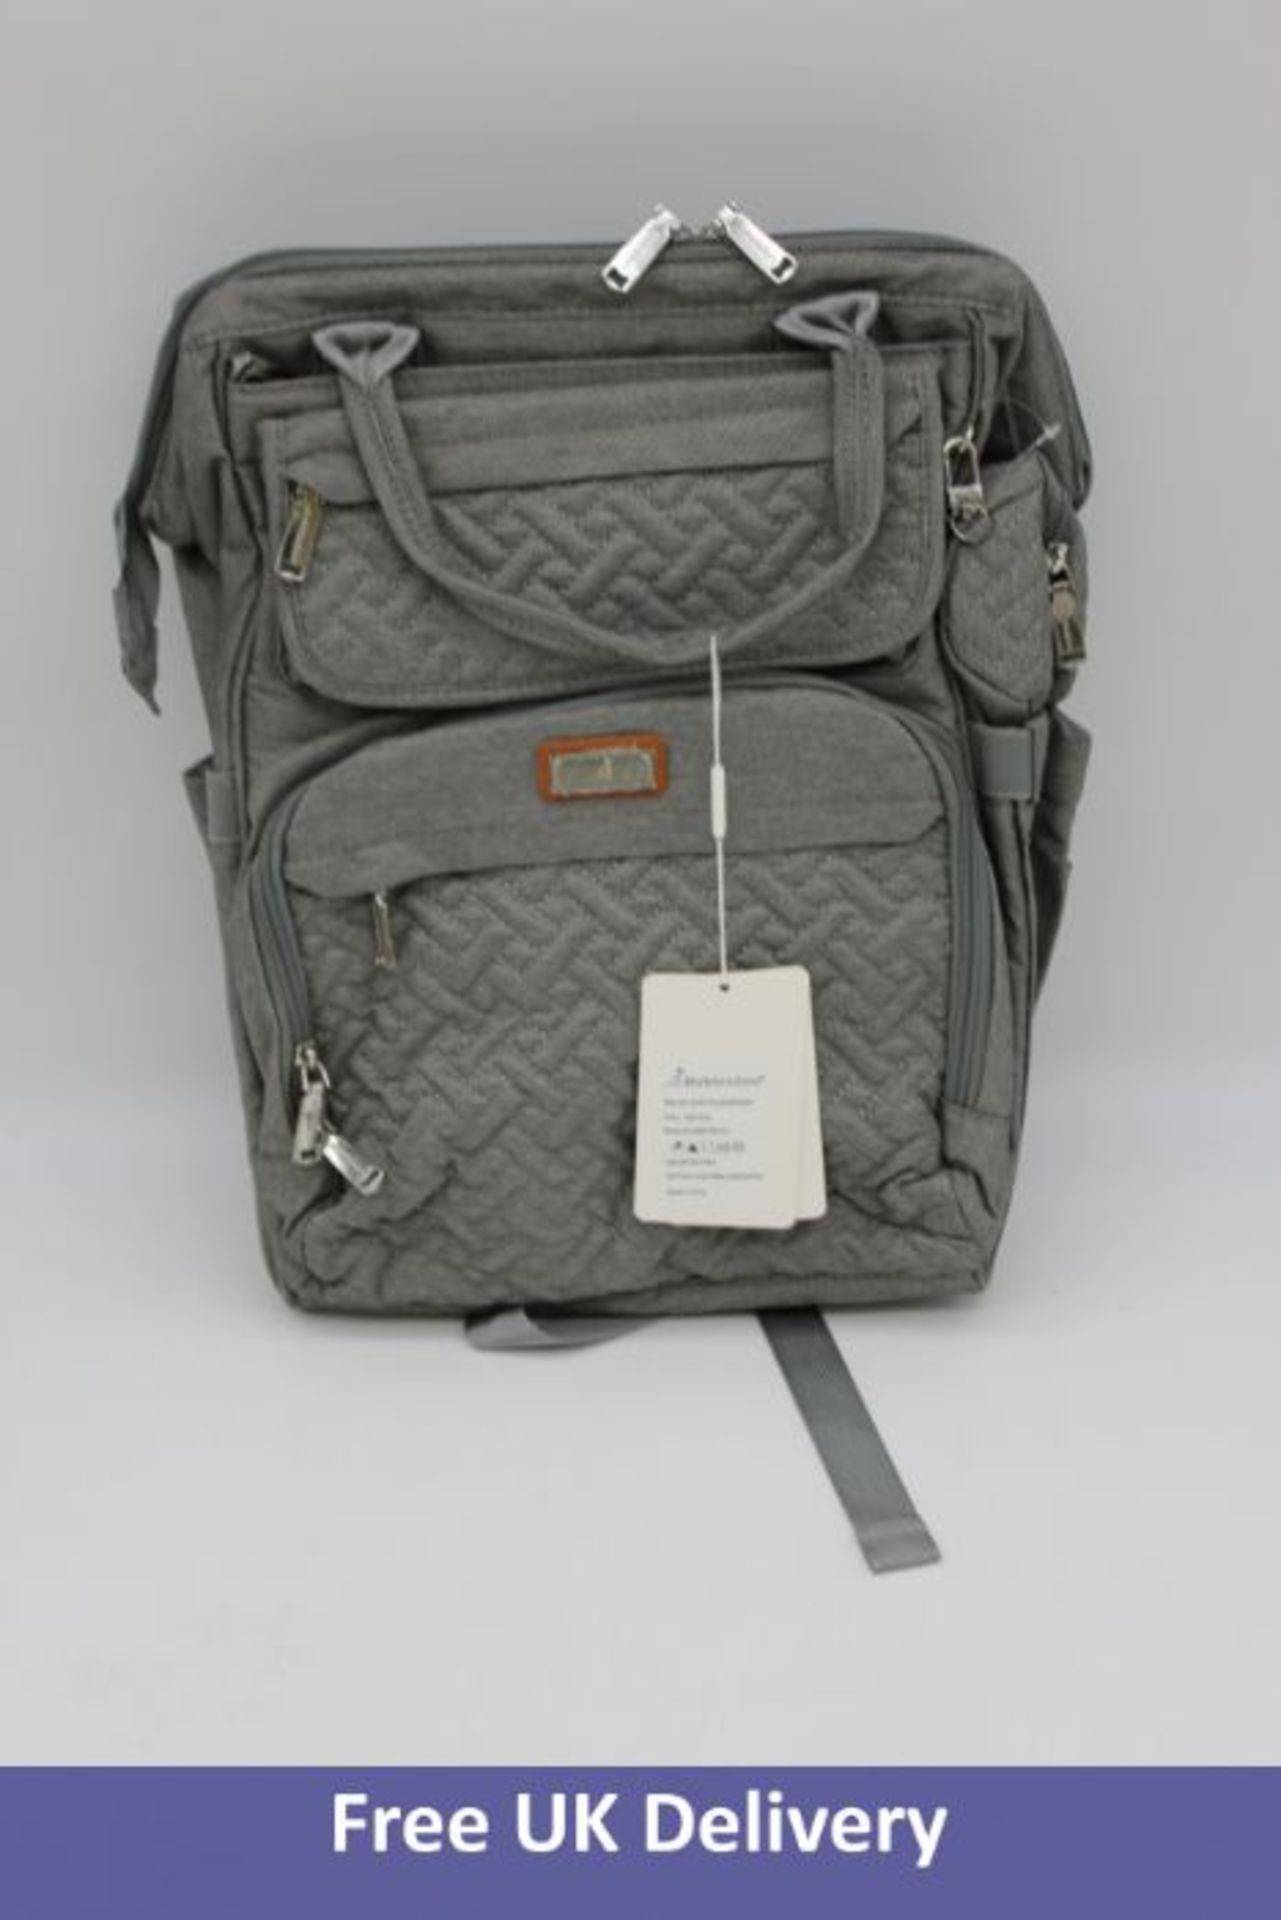 Five BabbleRoo Nappy Changing Back Pack, Diaper Bags with Changing Mat, Pacifier Holder for Mom & Da - Image 3 of 3